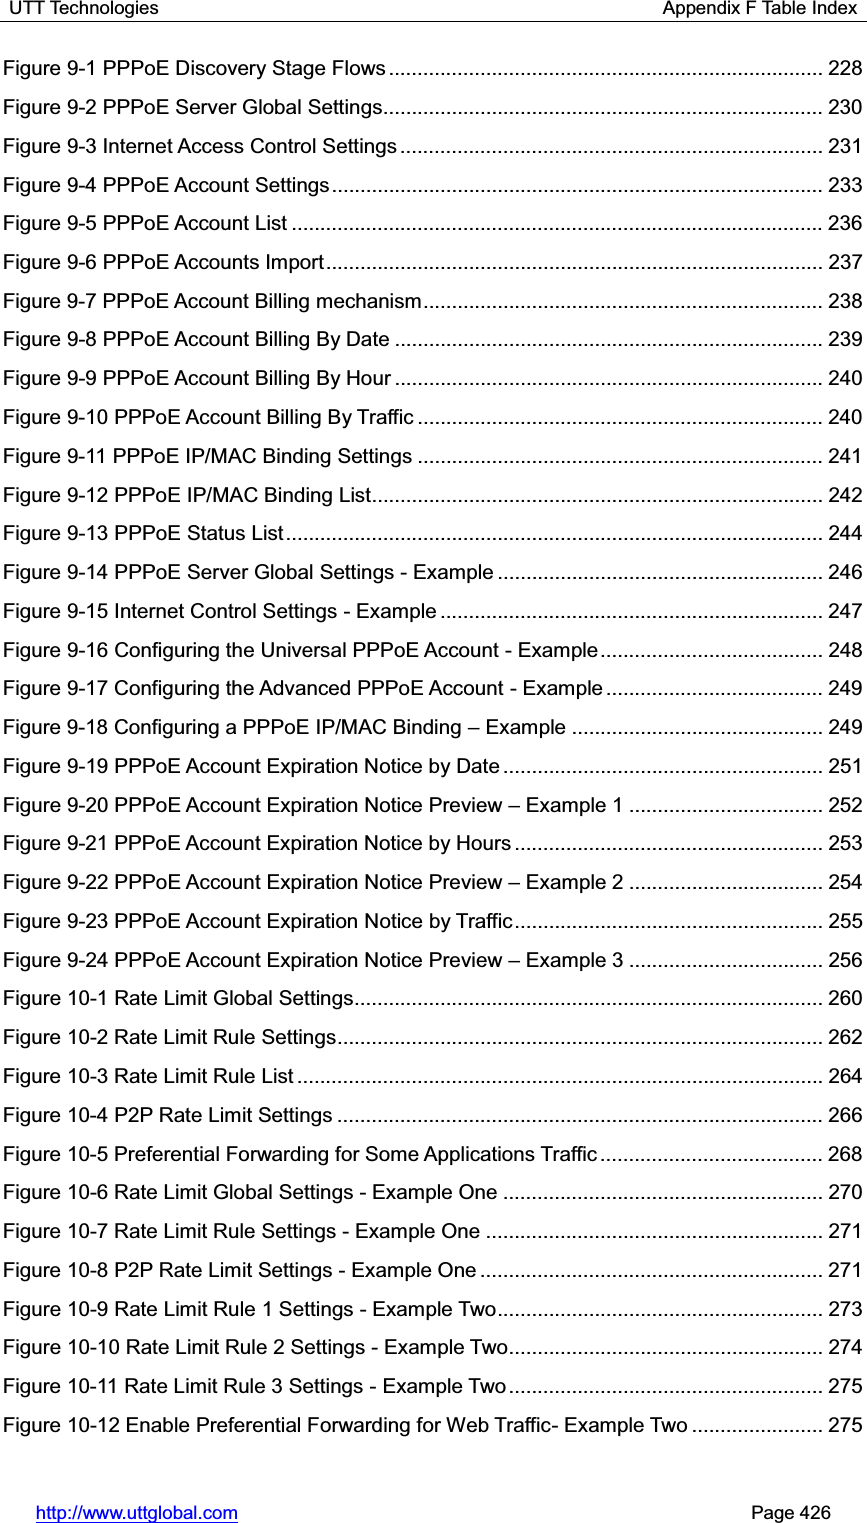 UTT Technologies                                                      Appendix F Table Index http://www.uttglobal.com                                                       Page 426 Figure 9-1 PPPoE Discovery Stage Flows ............................................................................ 228Figure 9-2 PPPoE Server Global Settings............................................................................. 230Figure 9-3 Internet Access Control Settings .......................................................................... 231Figure 9-4 PPPoE Account Settings ...................................................................................... 233Figure 9-5 PPPoE Account List ............................................................................................. 236Figure 9-6 PPPoE Accounts Import ....................................................................................... 237Figure 9-7 PPPoE Account Billing mechanism ...................................................................... 238Figure 9-8 PPPoE Account Billing By Date ........................................................................... 239Figure 9-9 PPPoE Account Billing By Hour ........................................................................... 240Figure 9-10 PPPoE Account Billing By Traffic ....................................................................... 240Figure 9-11 PPPoE IP/MAC Binding Settings ....................................................................... 241Figure 9-12 PPPoE IP/MAC Binding List............................................................................... 242Figure 9-13 PPPoE Status List .............................................................................................. 244Figure 9-14 PPPoE Server Global Settings - Example ......................................................... 246Figure 9-15 Internet Control Settings - Example ................................................................... 247Figure 9-16 Configuring the Universal PPPoE Account - Example ....................................... 248Figure 9-17 Configuring the Advanced PPPoE Account - Example ...................................... 249Figure 9-18 Configuring a PPPoE IP/MAC Binding ± Example ............................................ 249Figure 9-19 PPPoE Account Expiration Notice by Date ........................................................ 251Figure 9-20 PPPoE Account Expiration Notice Preview ± Example 1 .................................. 252Figure 9-21 PPPoE Account Expiration Notice by Hours ...................................................... 253Figure 9-22 PPPoE Account Expiration Notice Preview ± Example 2 .................................. 254Figure 9-23 PPPoE Account Expiration Notice by Traffic ...................................................... 255Figure 9-24 PPPoE Account Expiration Notice Preview ± Example 3 .................................. 256Figure 10-1 Rate Limit Global Settings .................................................................................. 260Figure 10-2 Rate Limit Rule Settings ..................................................................................... 262Figure 10-3 Rate Limit Rule List ............................................................................................ 264Figure 10-4 P2P Rate Limit Settings ..................................................................................... 266Figure 10-5 Preferential Forwarding for Some Applications Traffic ....................................... 268Figure 10-6 Rate Limit Global Settings - Example One ........................................................ 270Figure 10-7 Rate Limit Rule Settings - Example One ........................................................... 271Figure 10-8 P2P Rate Limit Settings - Example One ............................................................ 271Figure 10-9 Rate Limit Rule 1 Settings - Example Two ......................................................... 273Figure 10-10 Rate Limit Rule 2 Settings - Example Two ....................................................... 274Figure 10-11 Rate Limit Rule 3 Settings - Example Two ....................................................... 275Figure 10-12 Enable Preferential Forwarding for Web Traffic- Example Two ....................... 275